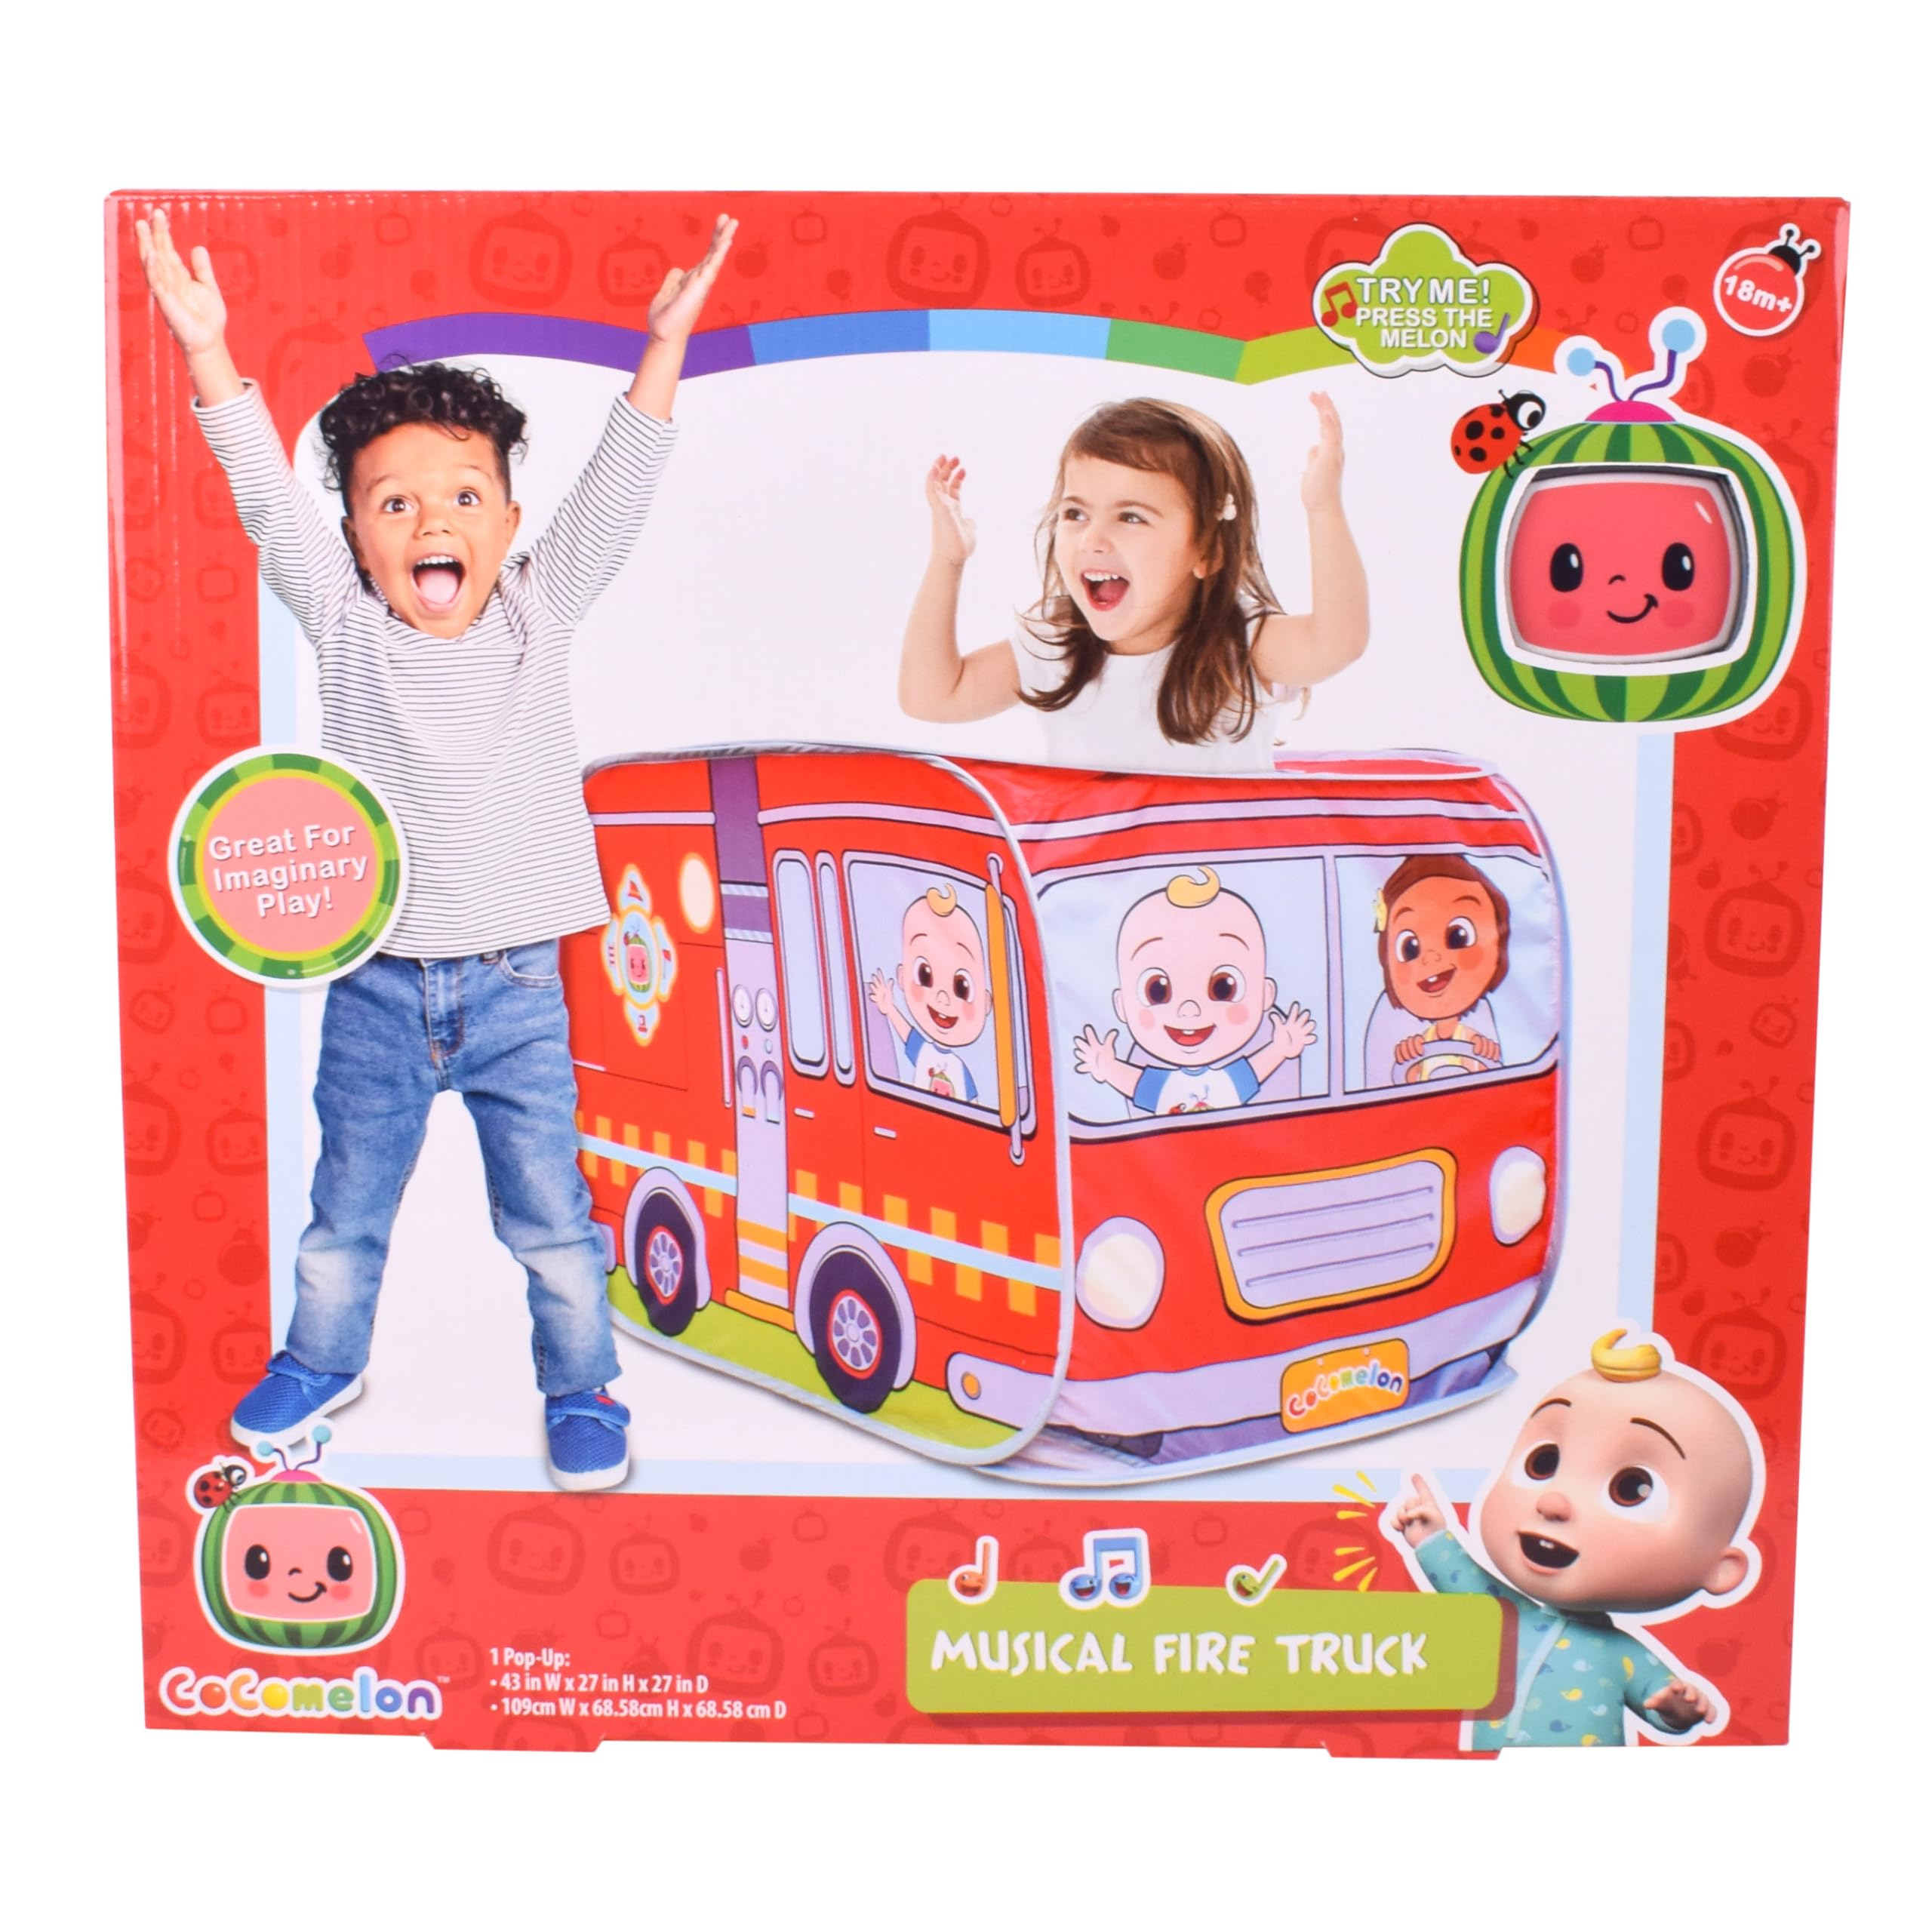 CoComelon Official Musical Firetruck – Pop Up Tent for Toddlers and Kids | Removable Musical Key Fob Plays Fire Drill Song | Red Fire Engine Vehicle Toy – Sunny Days Entertainment